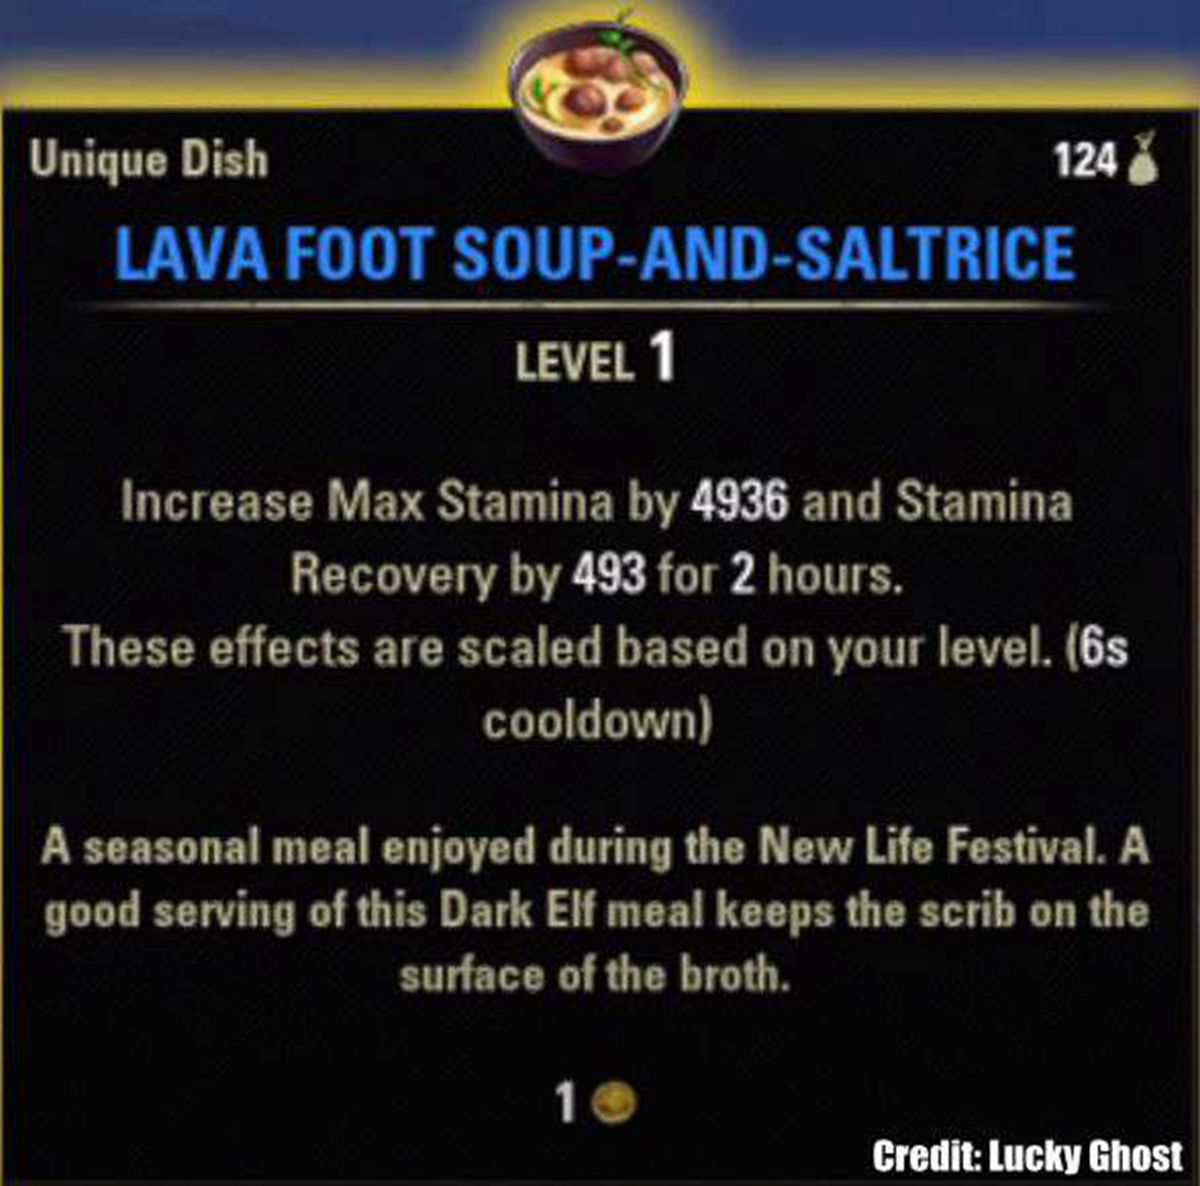 How to Increase DPS in ESO PIC 2 Lava Foot Soup and Saltrice